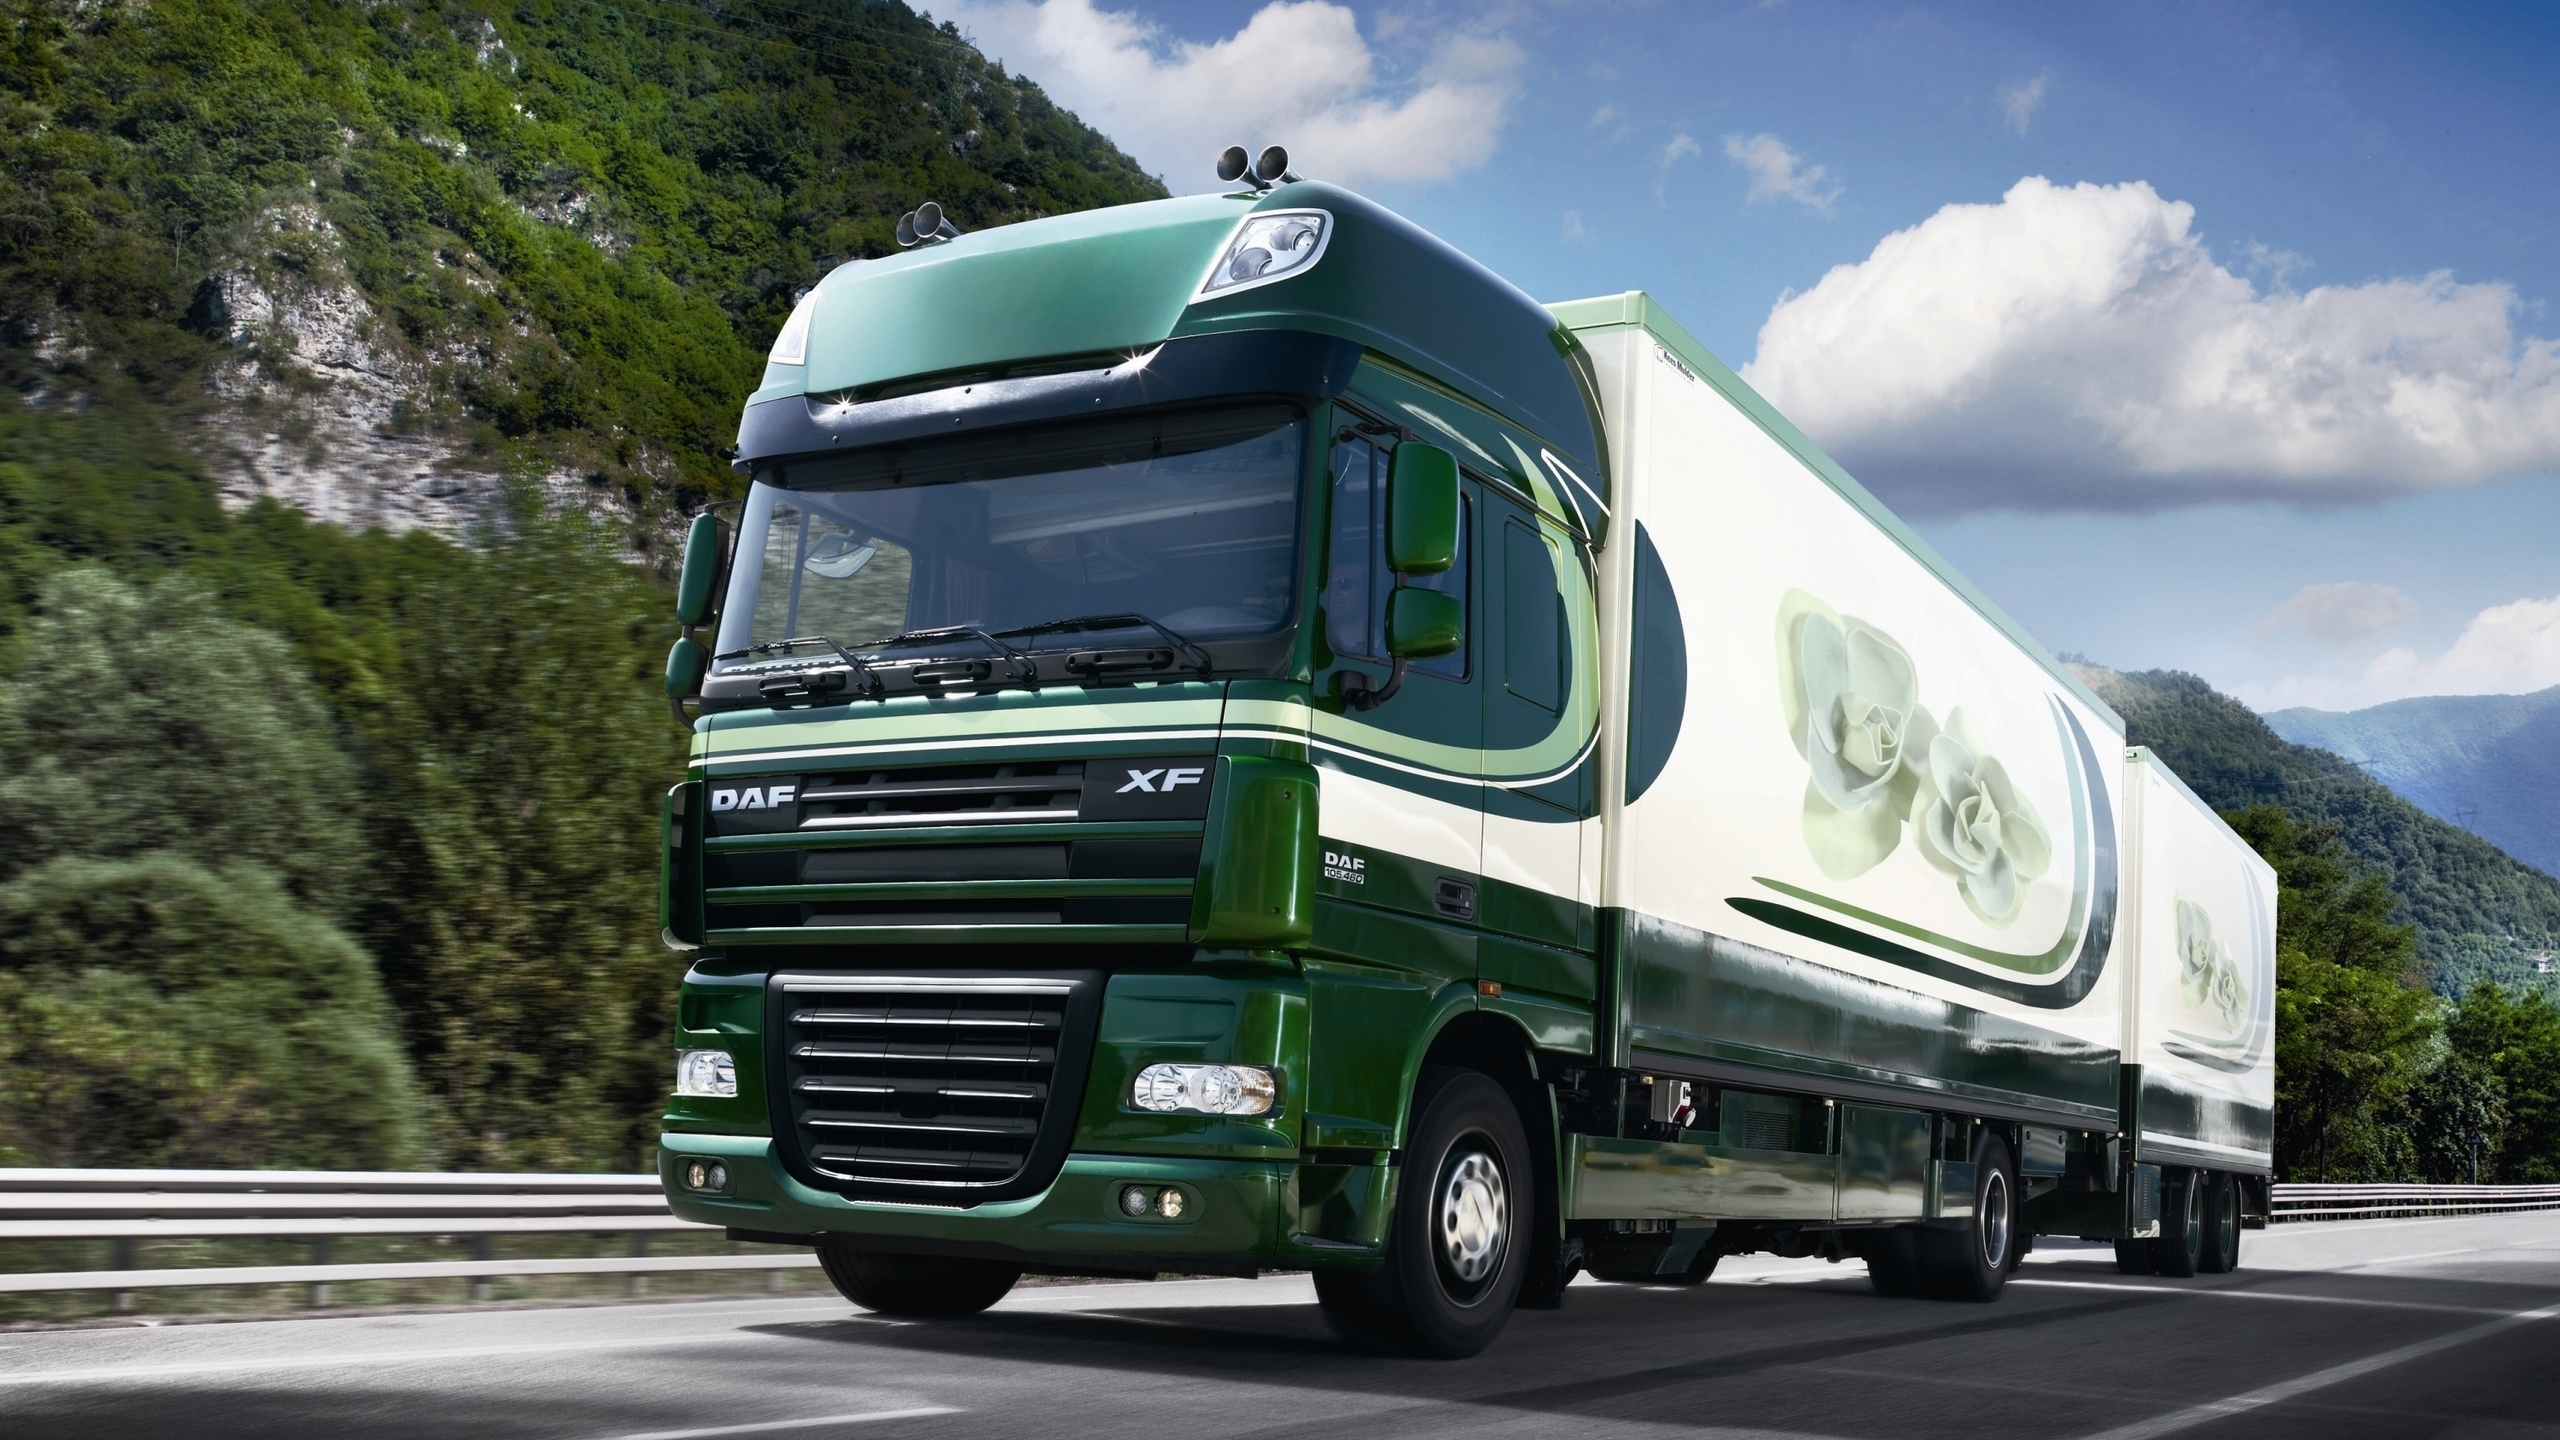 DAF XF 105 Truck for 2560x1440 HDTV resolution